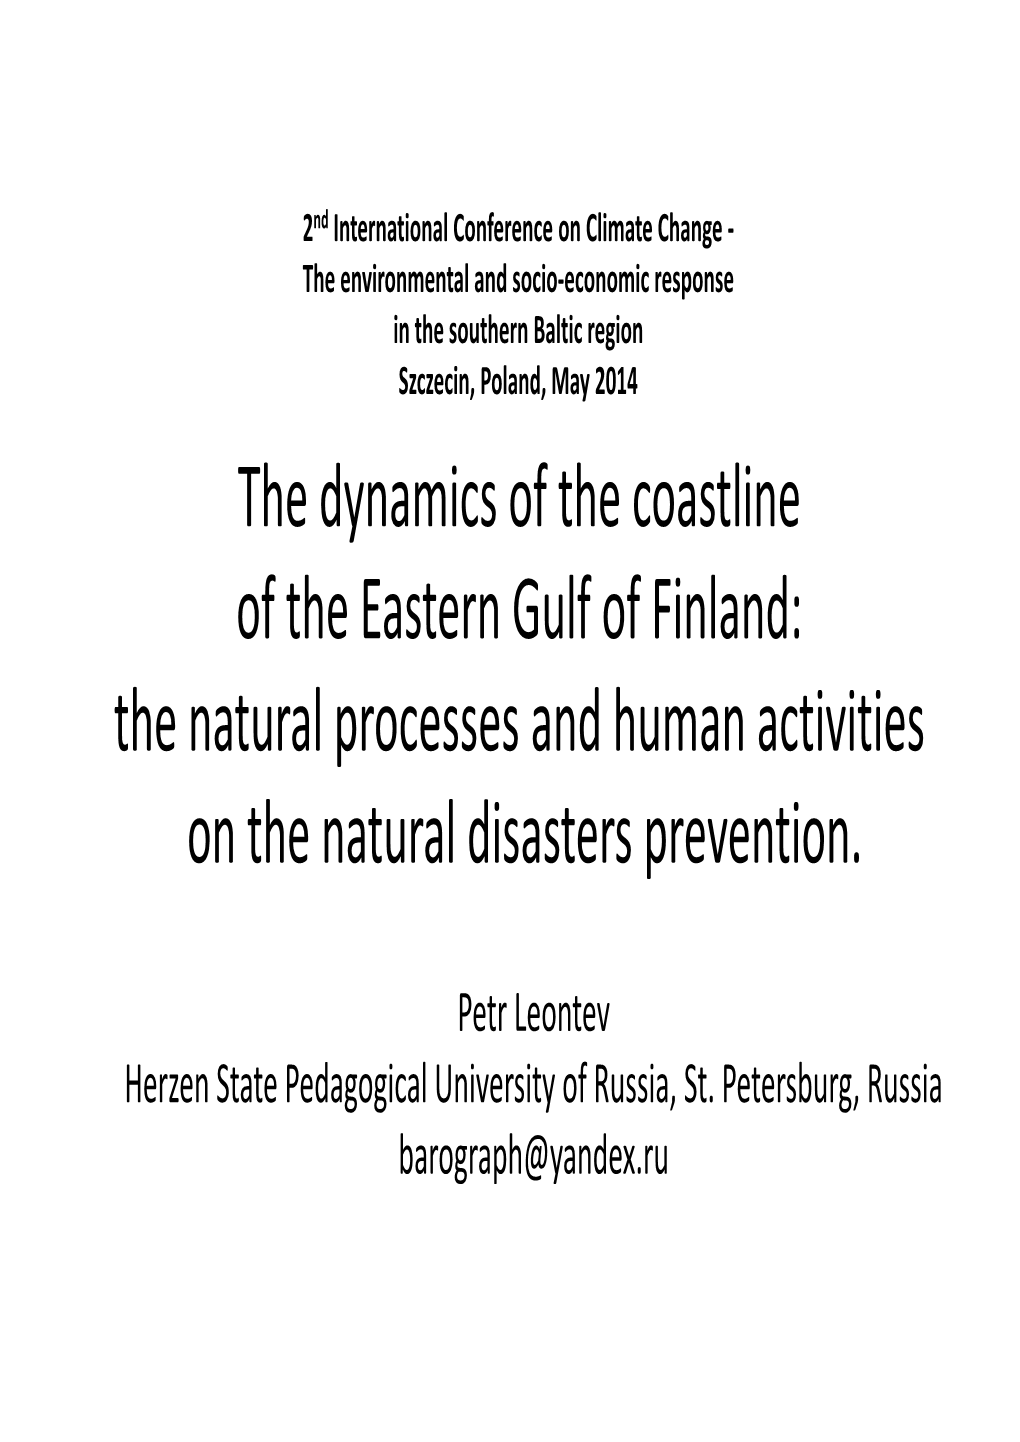 The Dynamics of the Coastline of the Eastern Gulf of Finland: the Natural Processes and Human Activities on the Natural Disasters Prevention